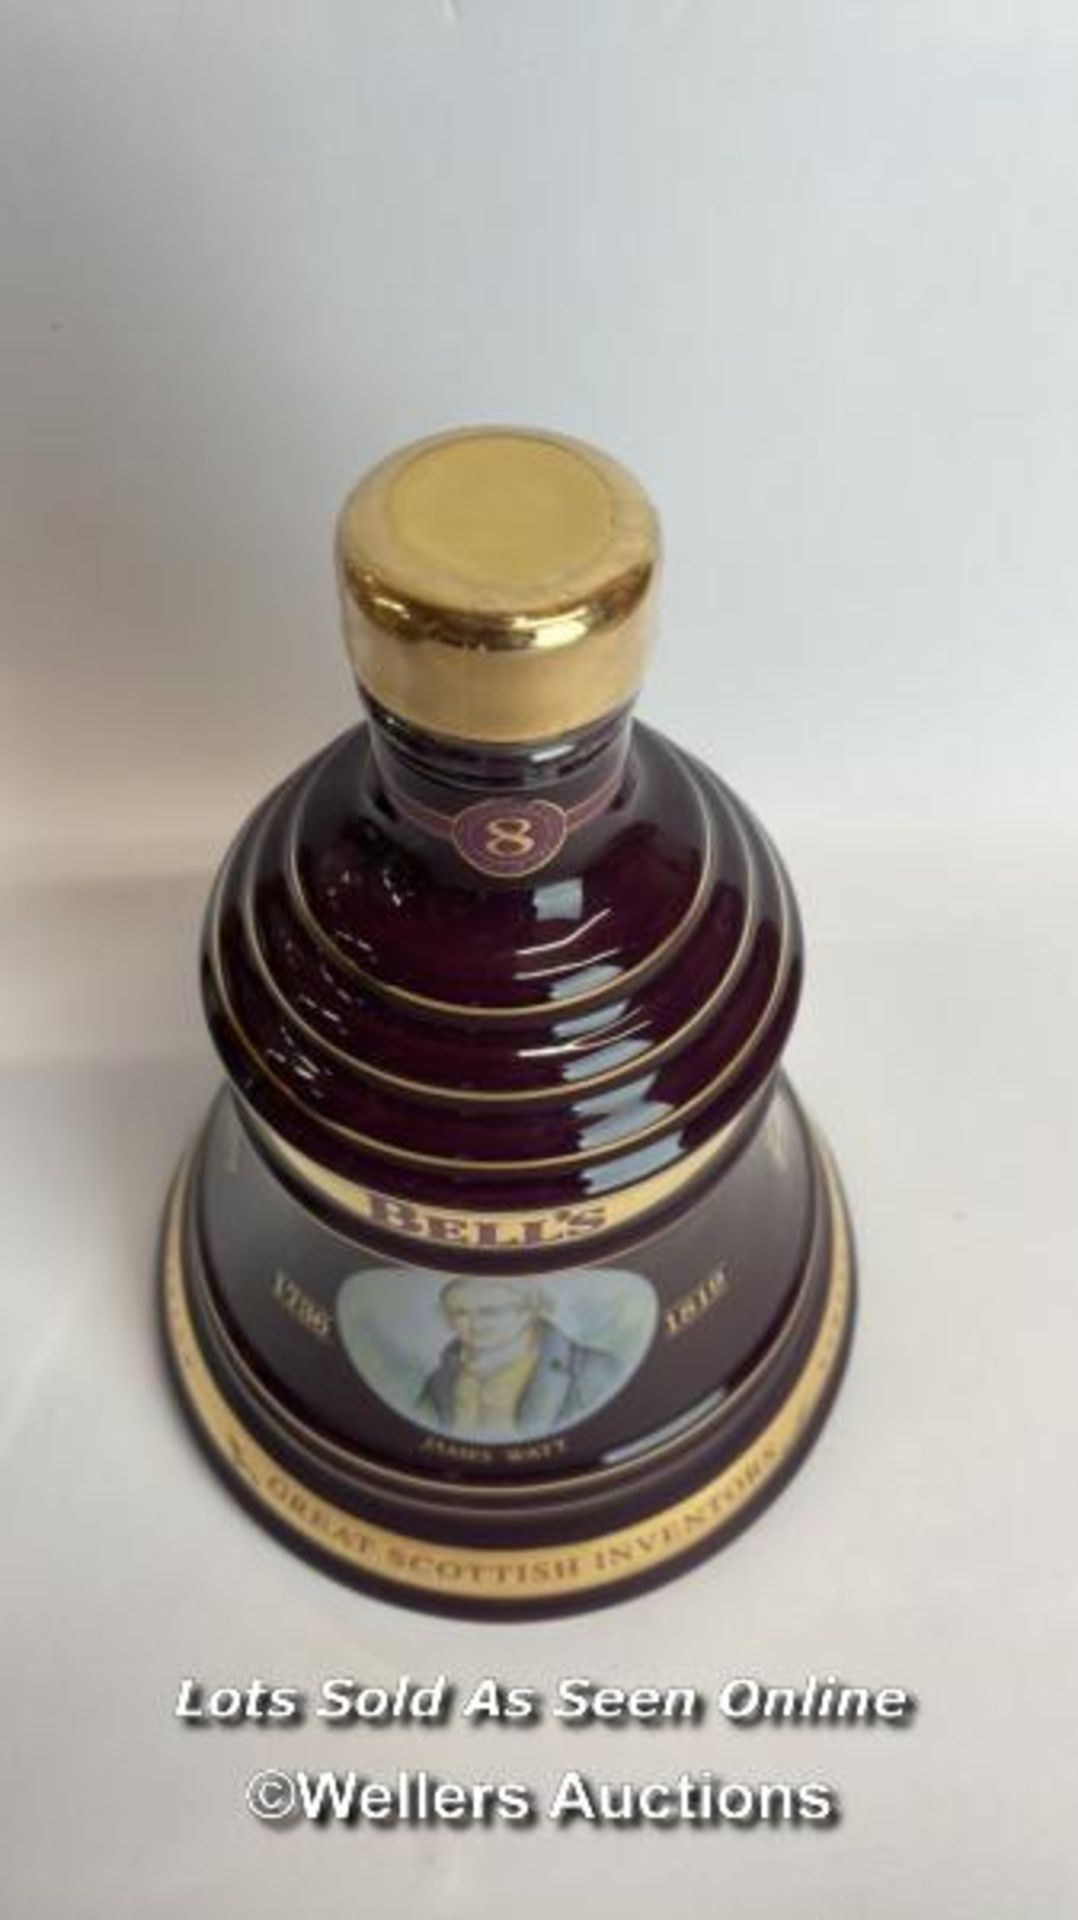 Bell's 2002 Old Scotch Whisky Limited Edition Christmas Decanter, Aged 8 Years, Brand New and Boxed, - Image 7 of 8